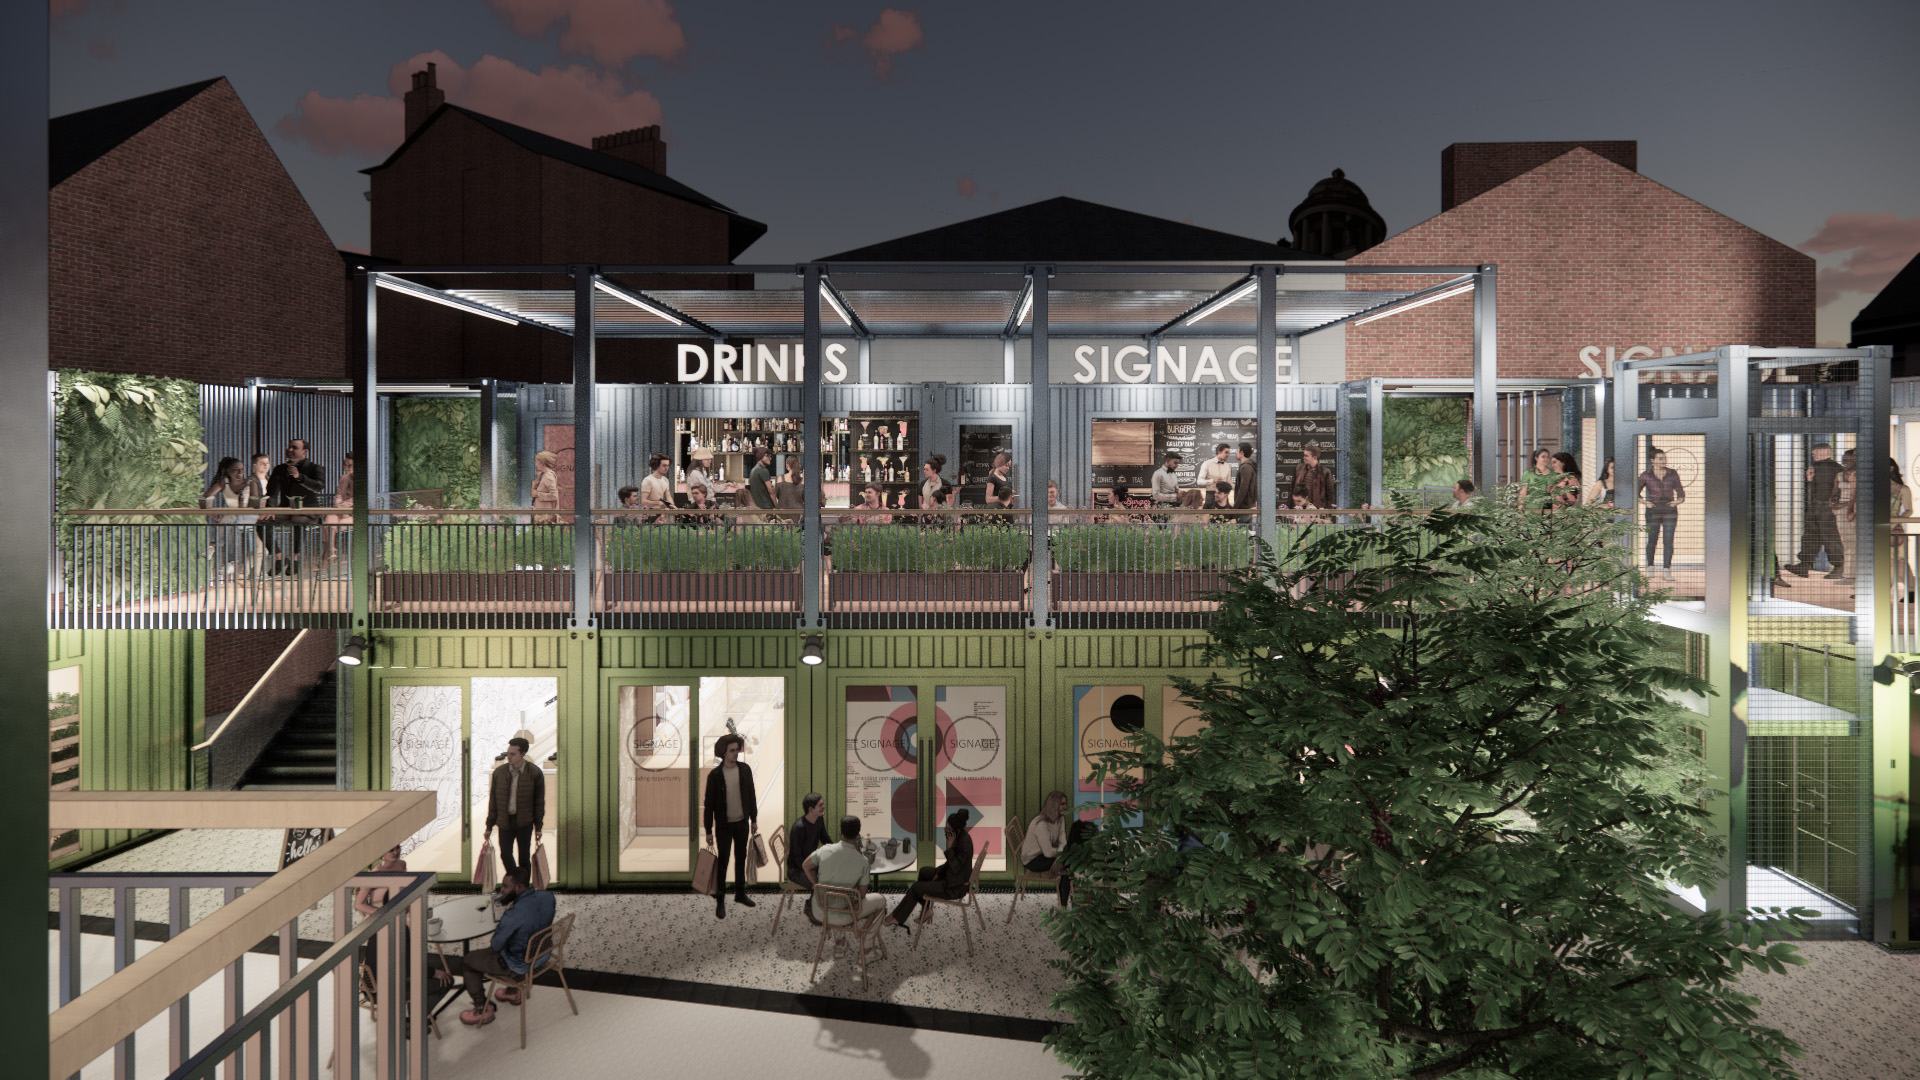 market place south bars leiscester architects rendering